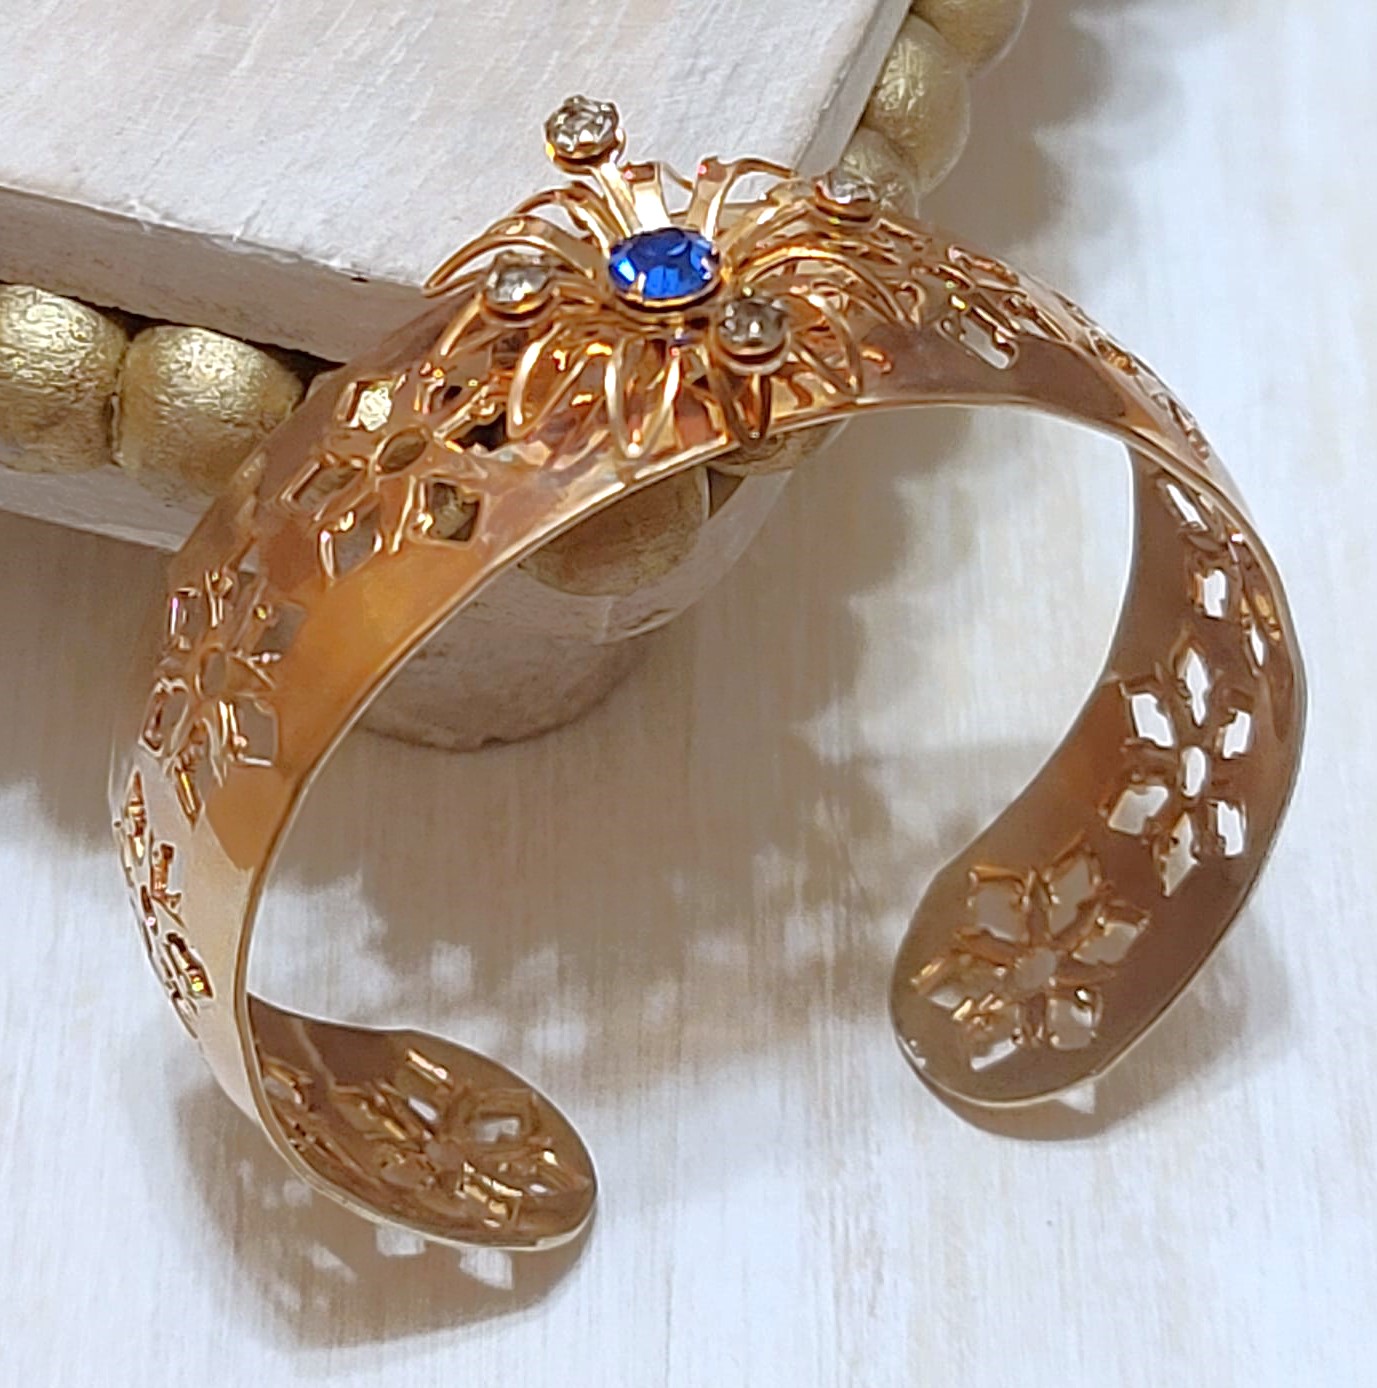 Copper cuff bracelet with cutout design with blue and white rhinestones, vintage bracelet